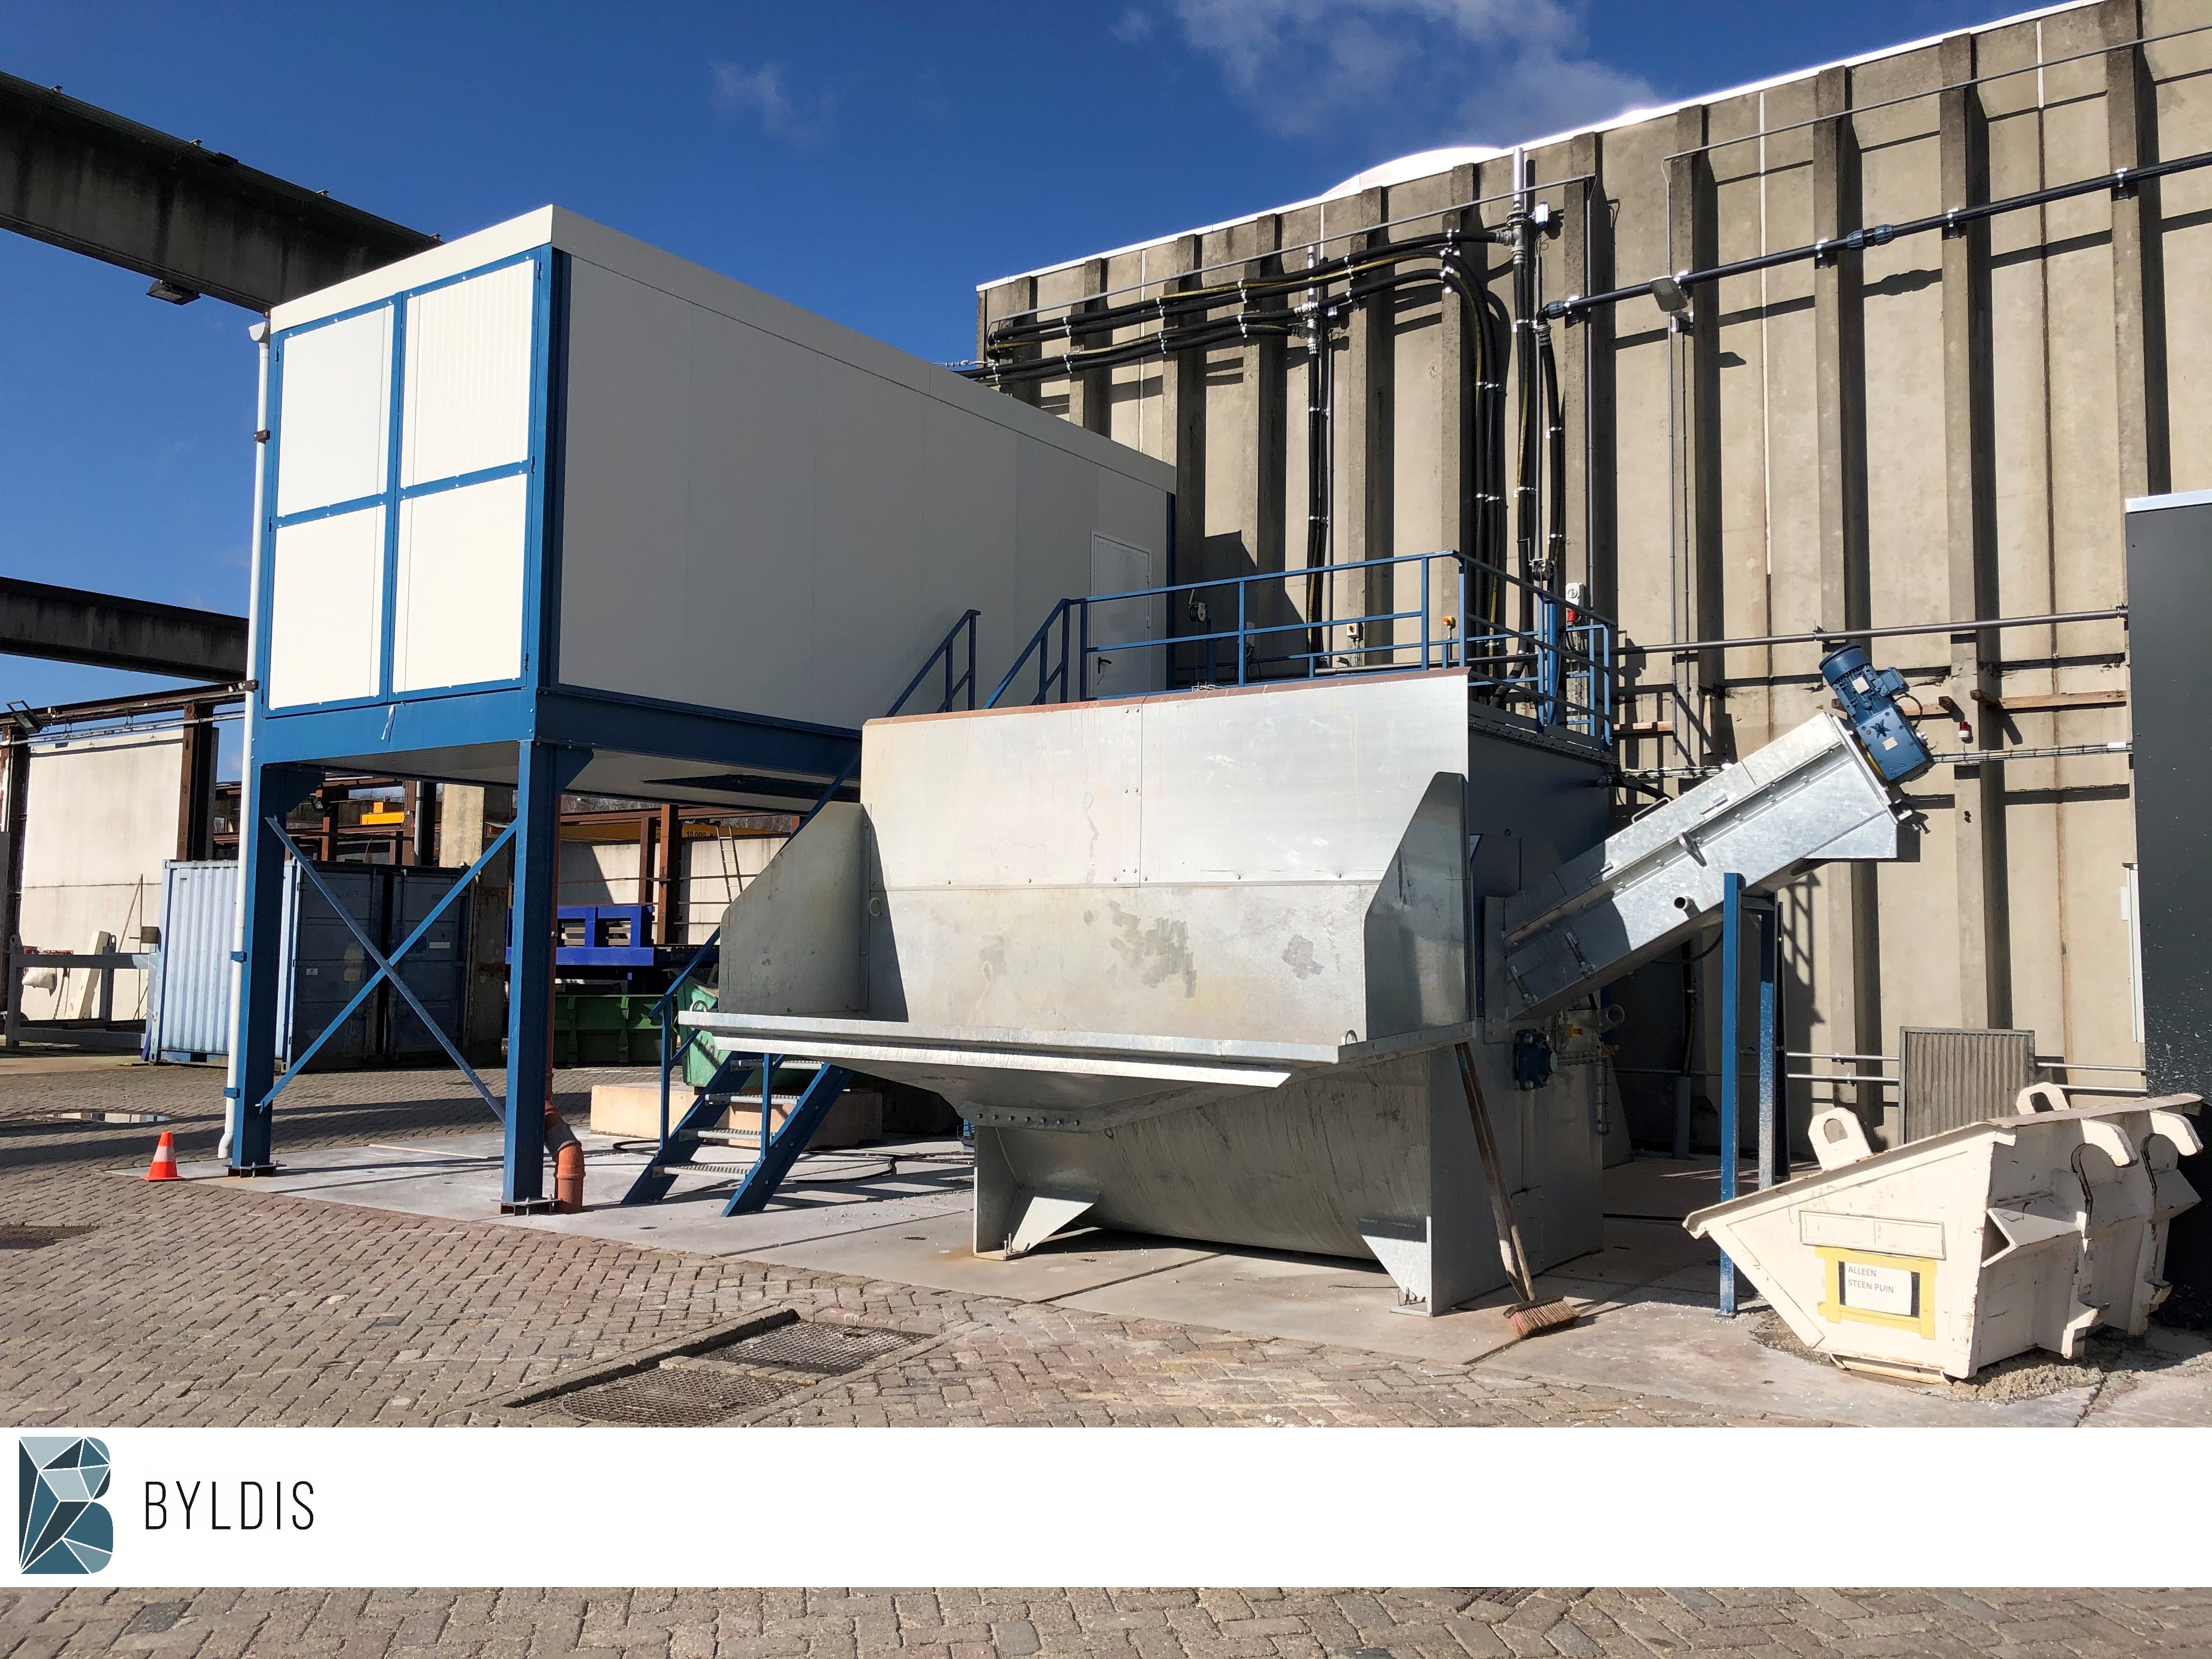 Residual concrete recycling system at the Byldis Prefab factory in Veldhoven